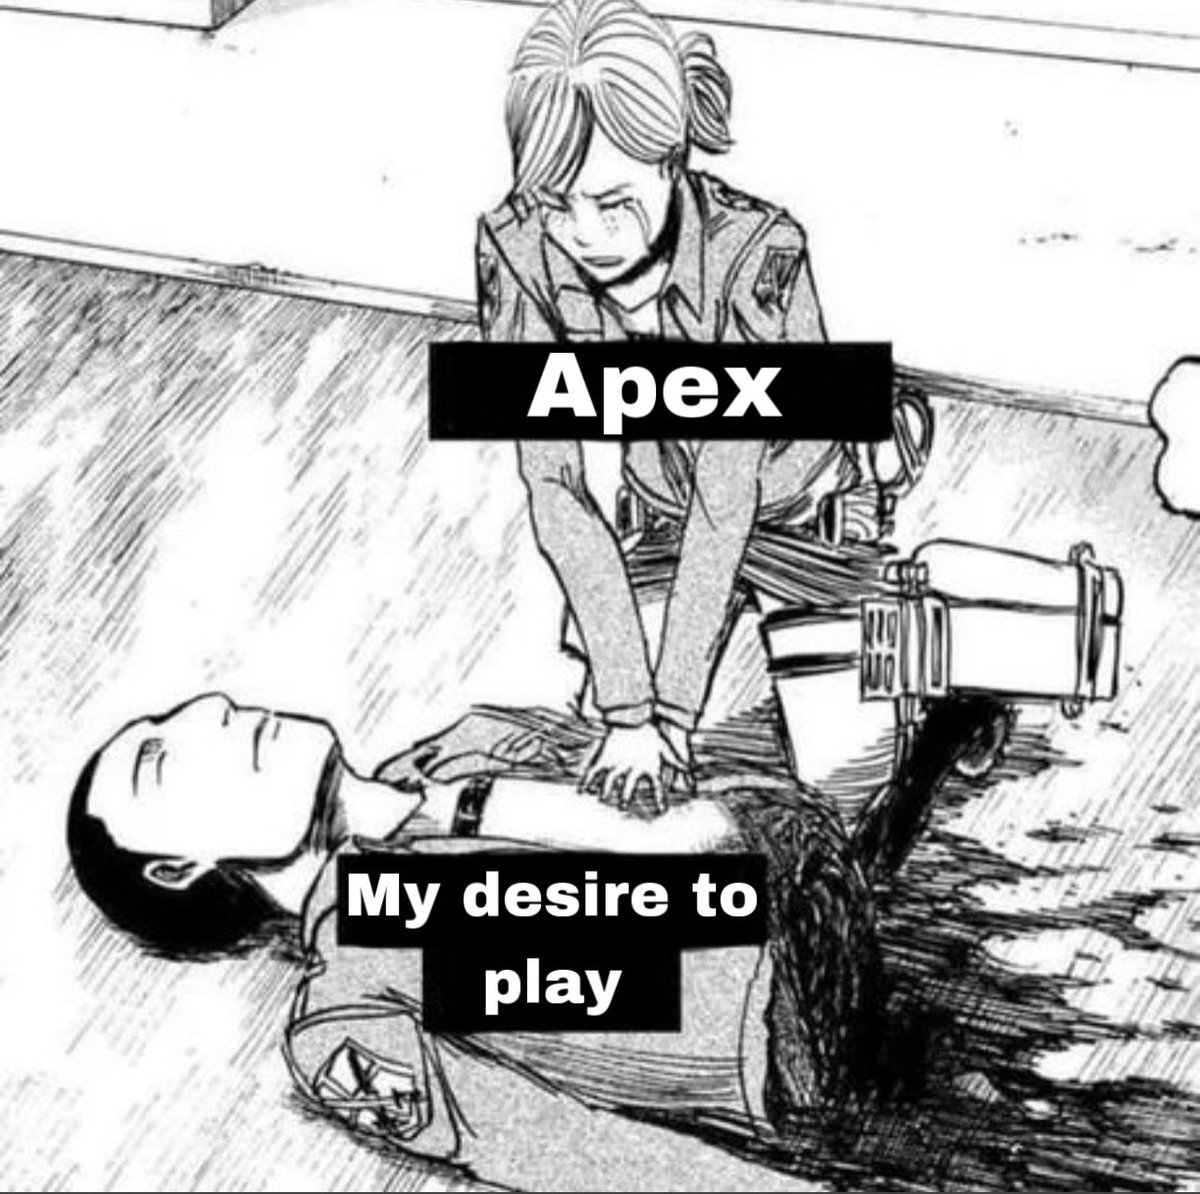 Sad story in one act #ApexLegends